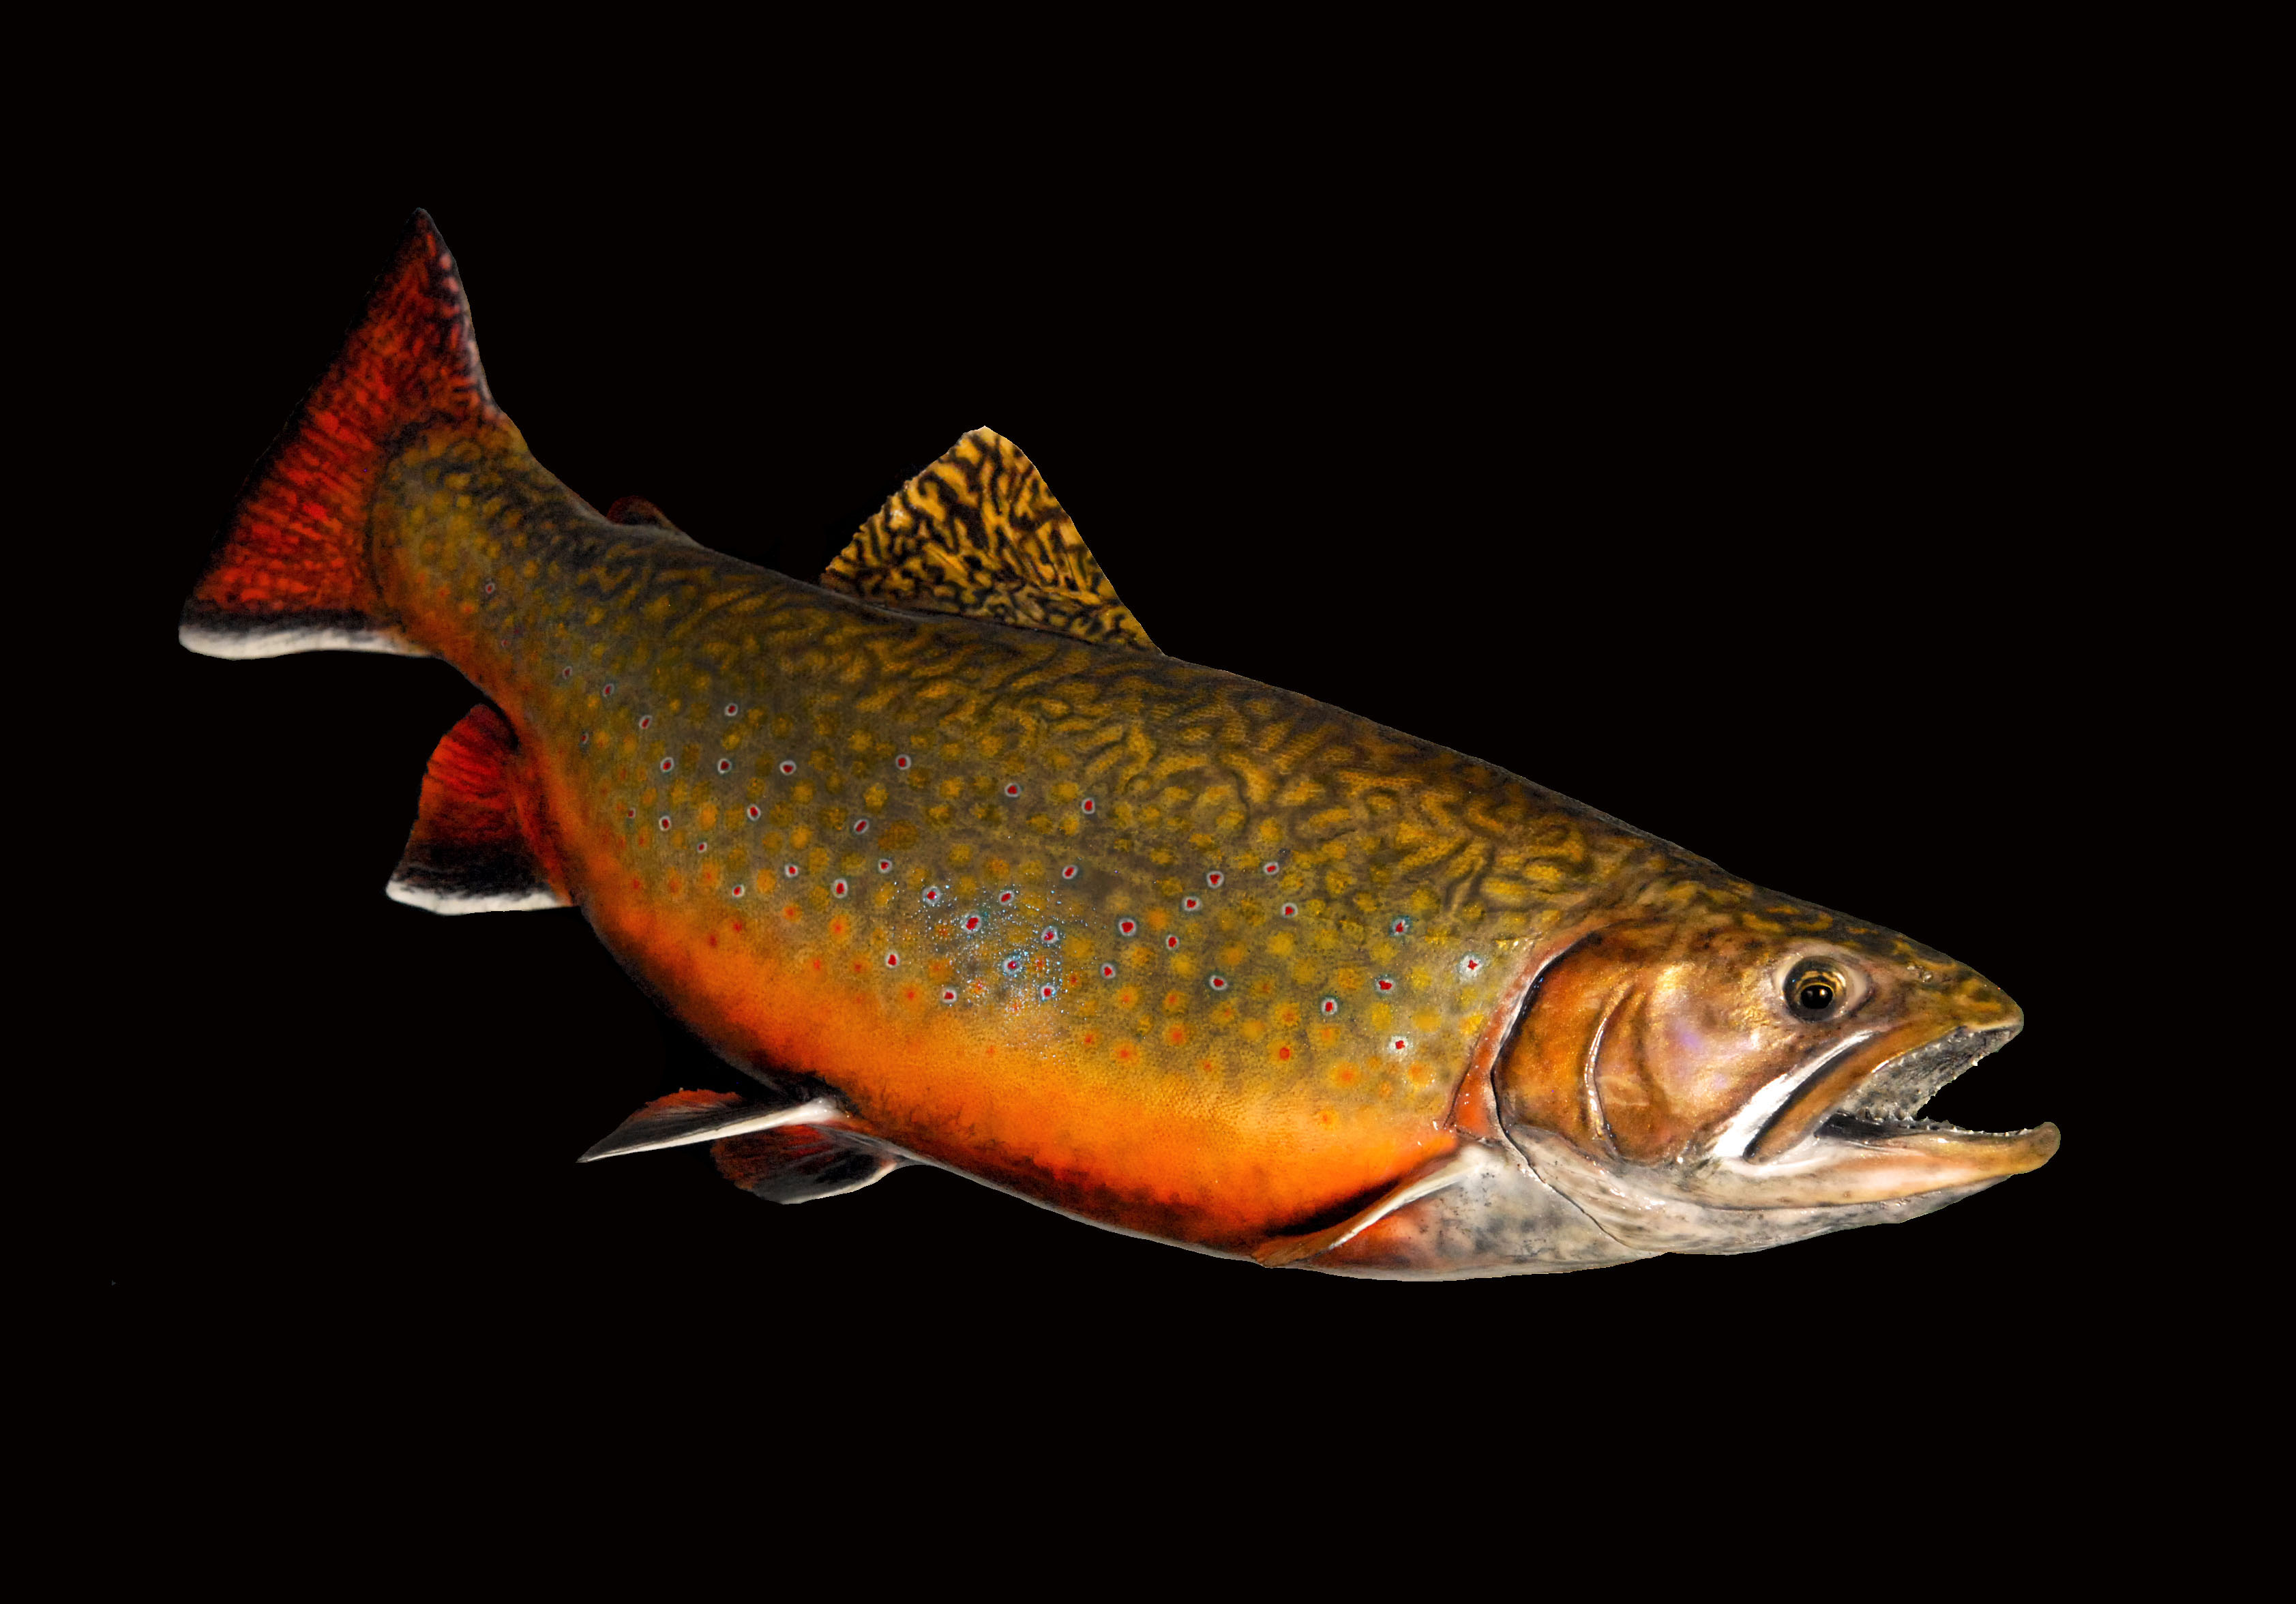 TW Brook Trout RT 21 x 12 - 5.0 LB - Ready to Paint